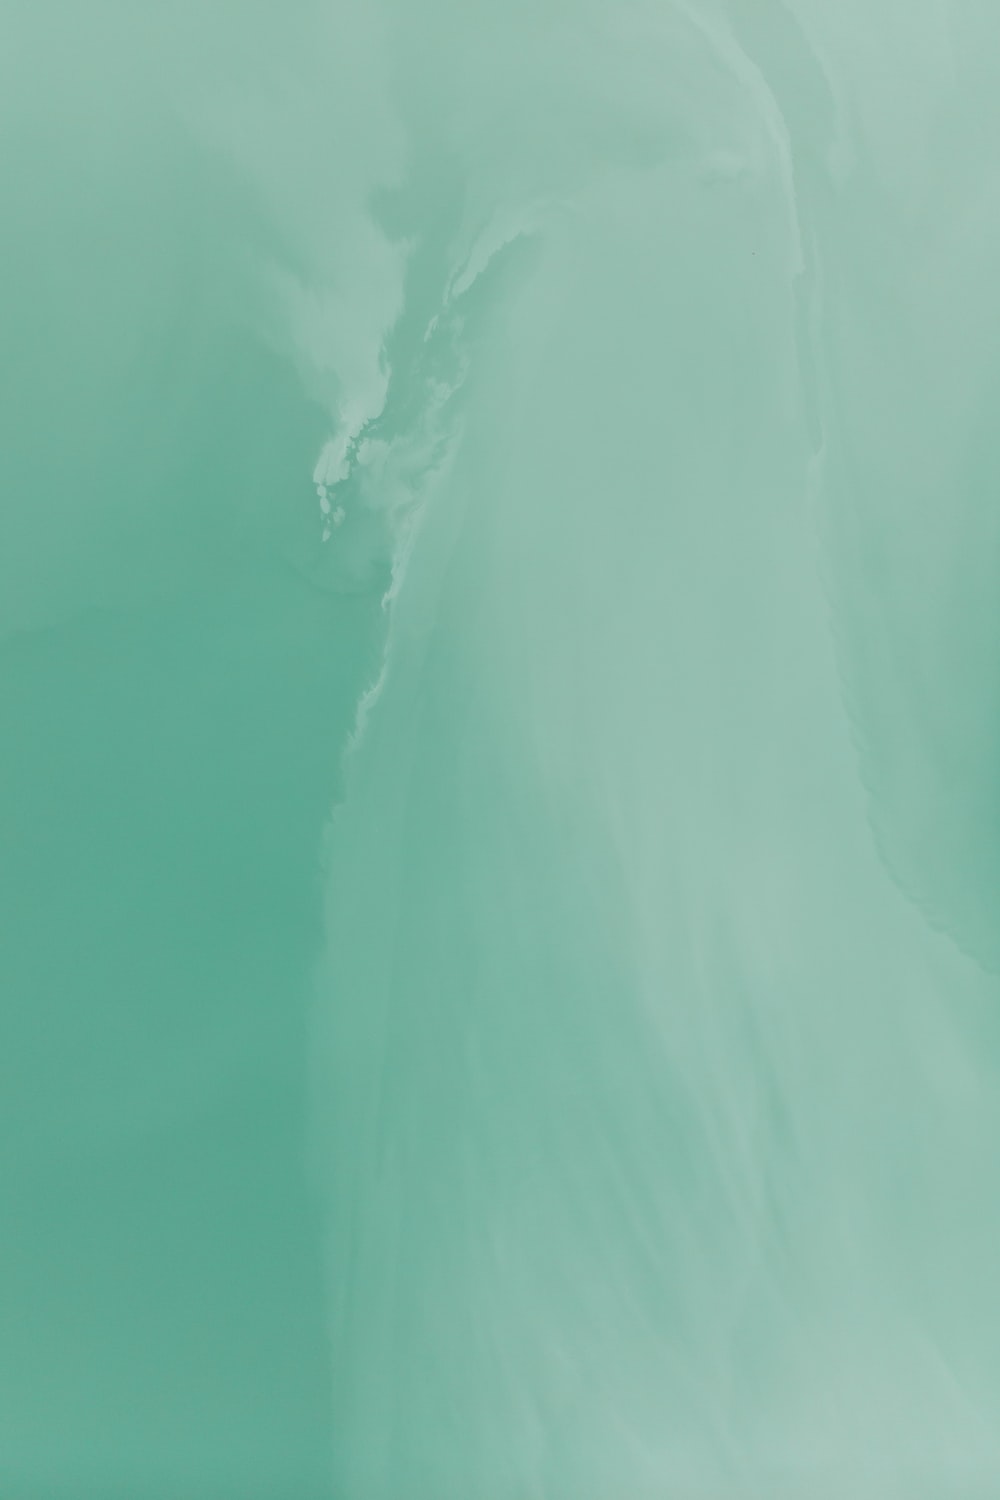 Seafoam Green Picture. Download Free Image